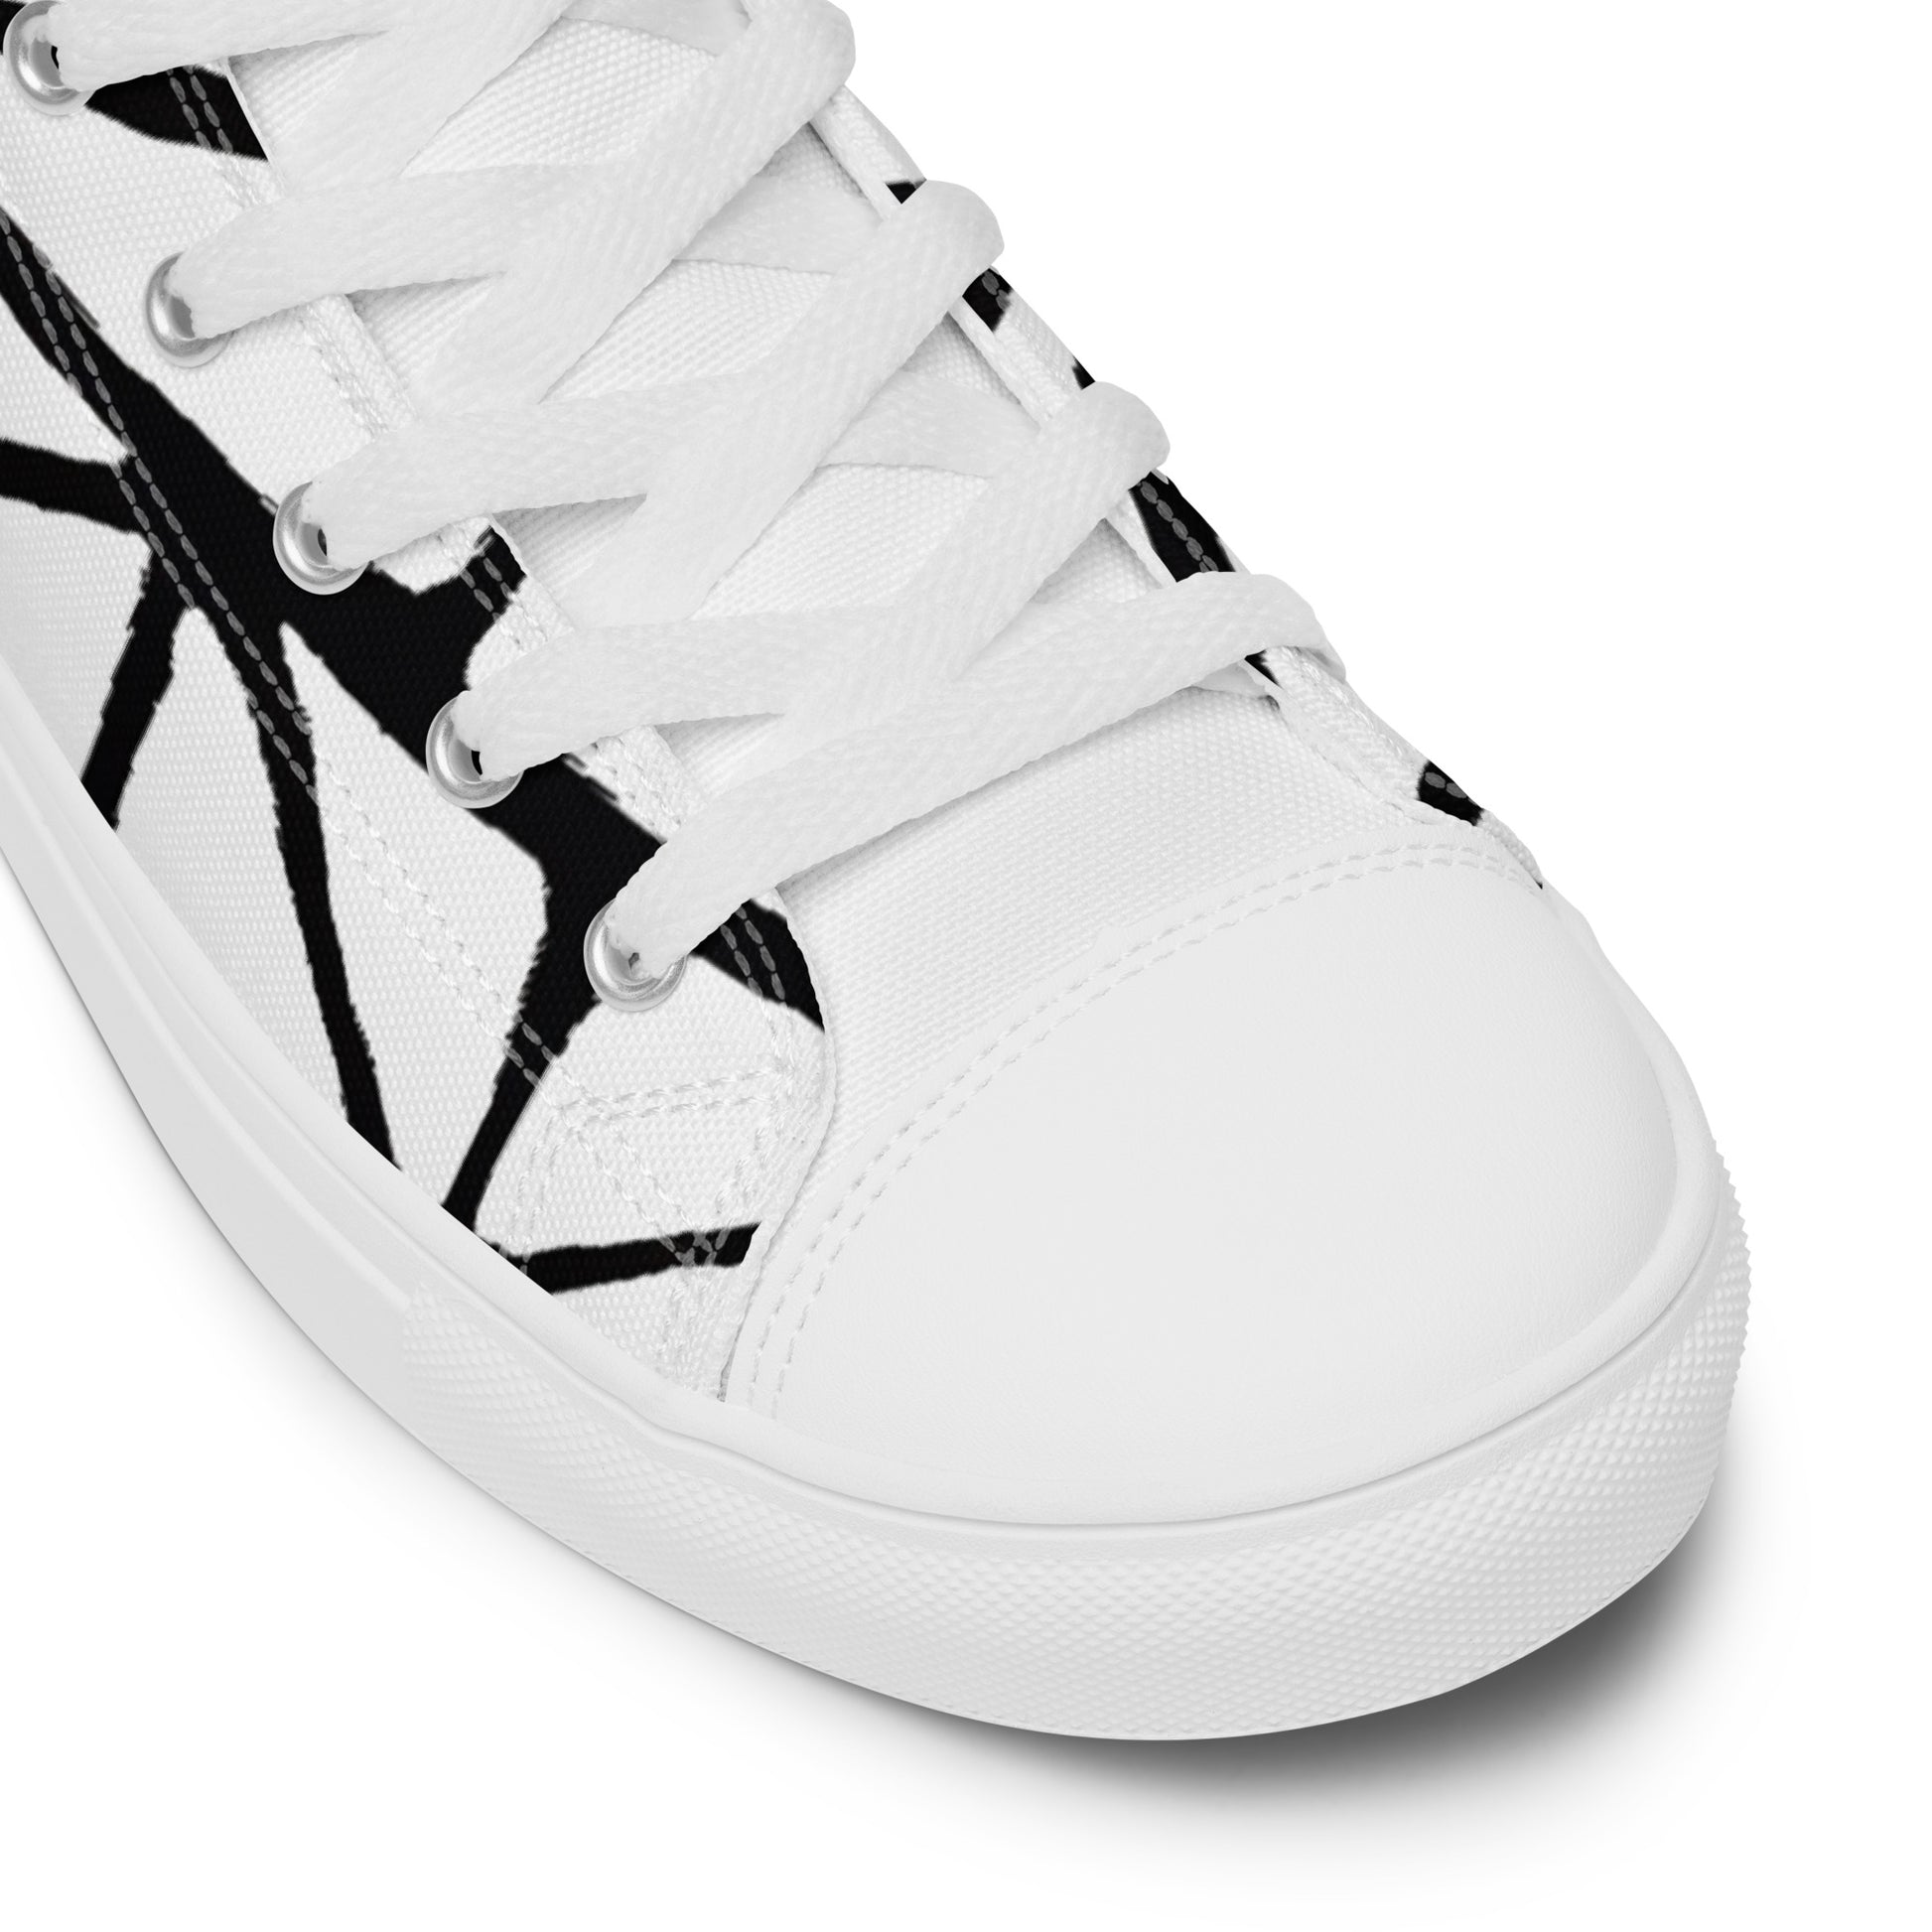 Tribal Black and White Men’s High Top Canvas Shoes | Geometric Print Shoes | Stylish Festival Sneakers | Casual Style | Lace Up Sneakers - Comfortable Culture - Shoes - Comfortable Culture